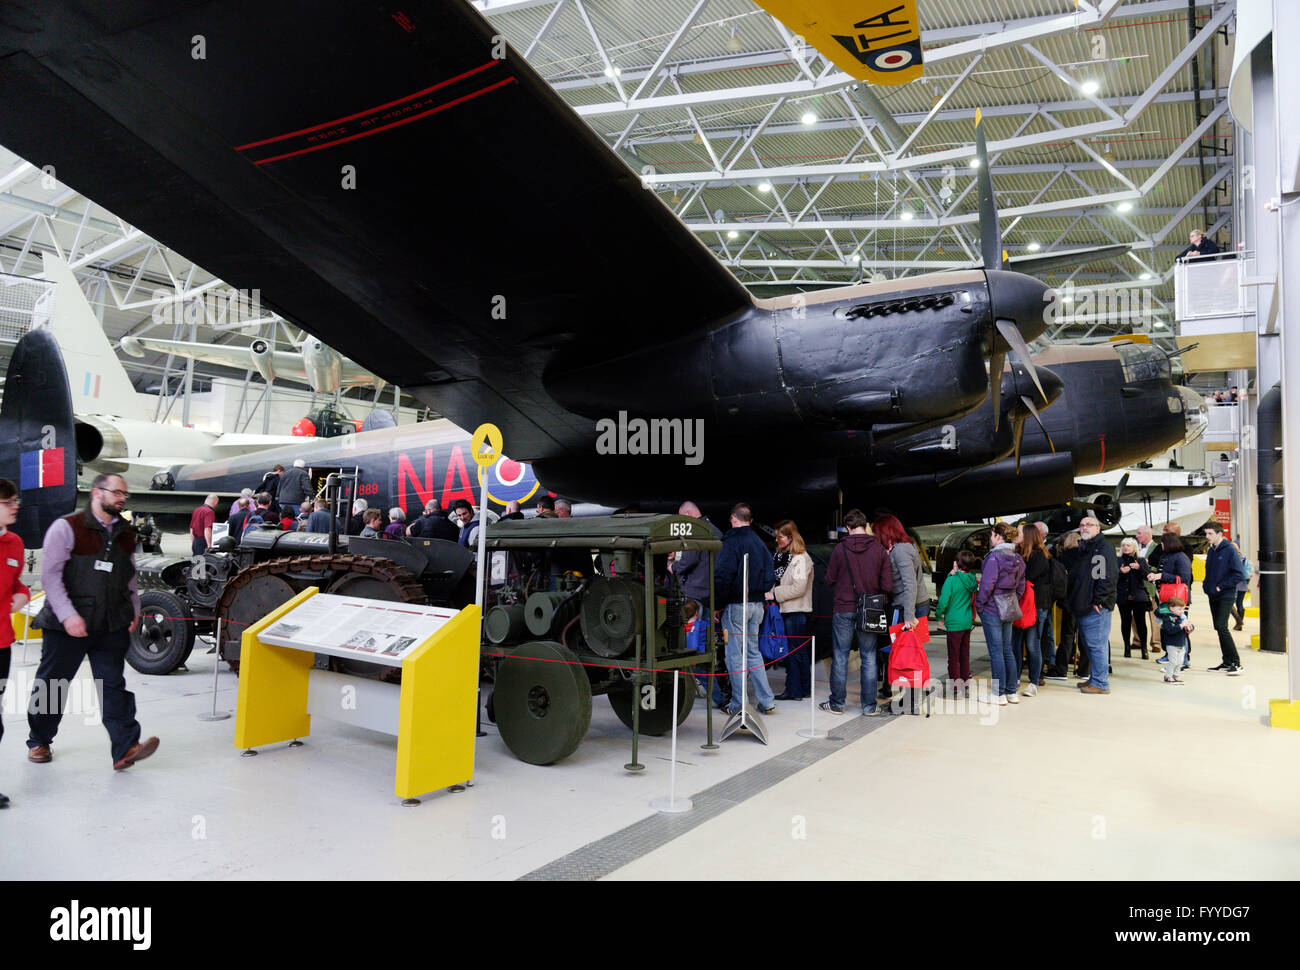 People queuing to get into the Lancaster bomber at Duxfod Air Museum, England Stock Photo